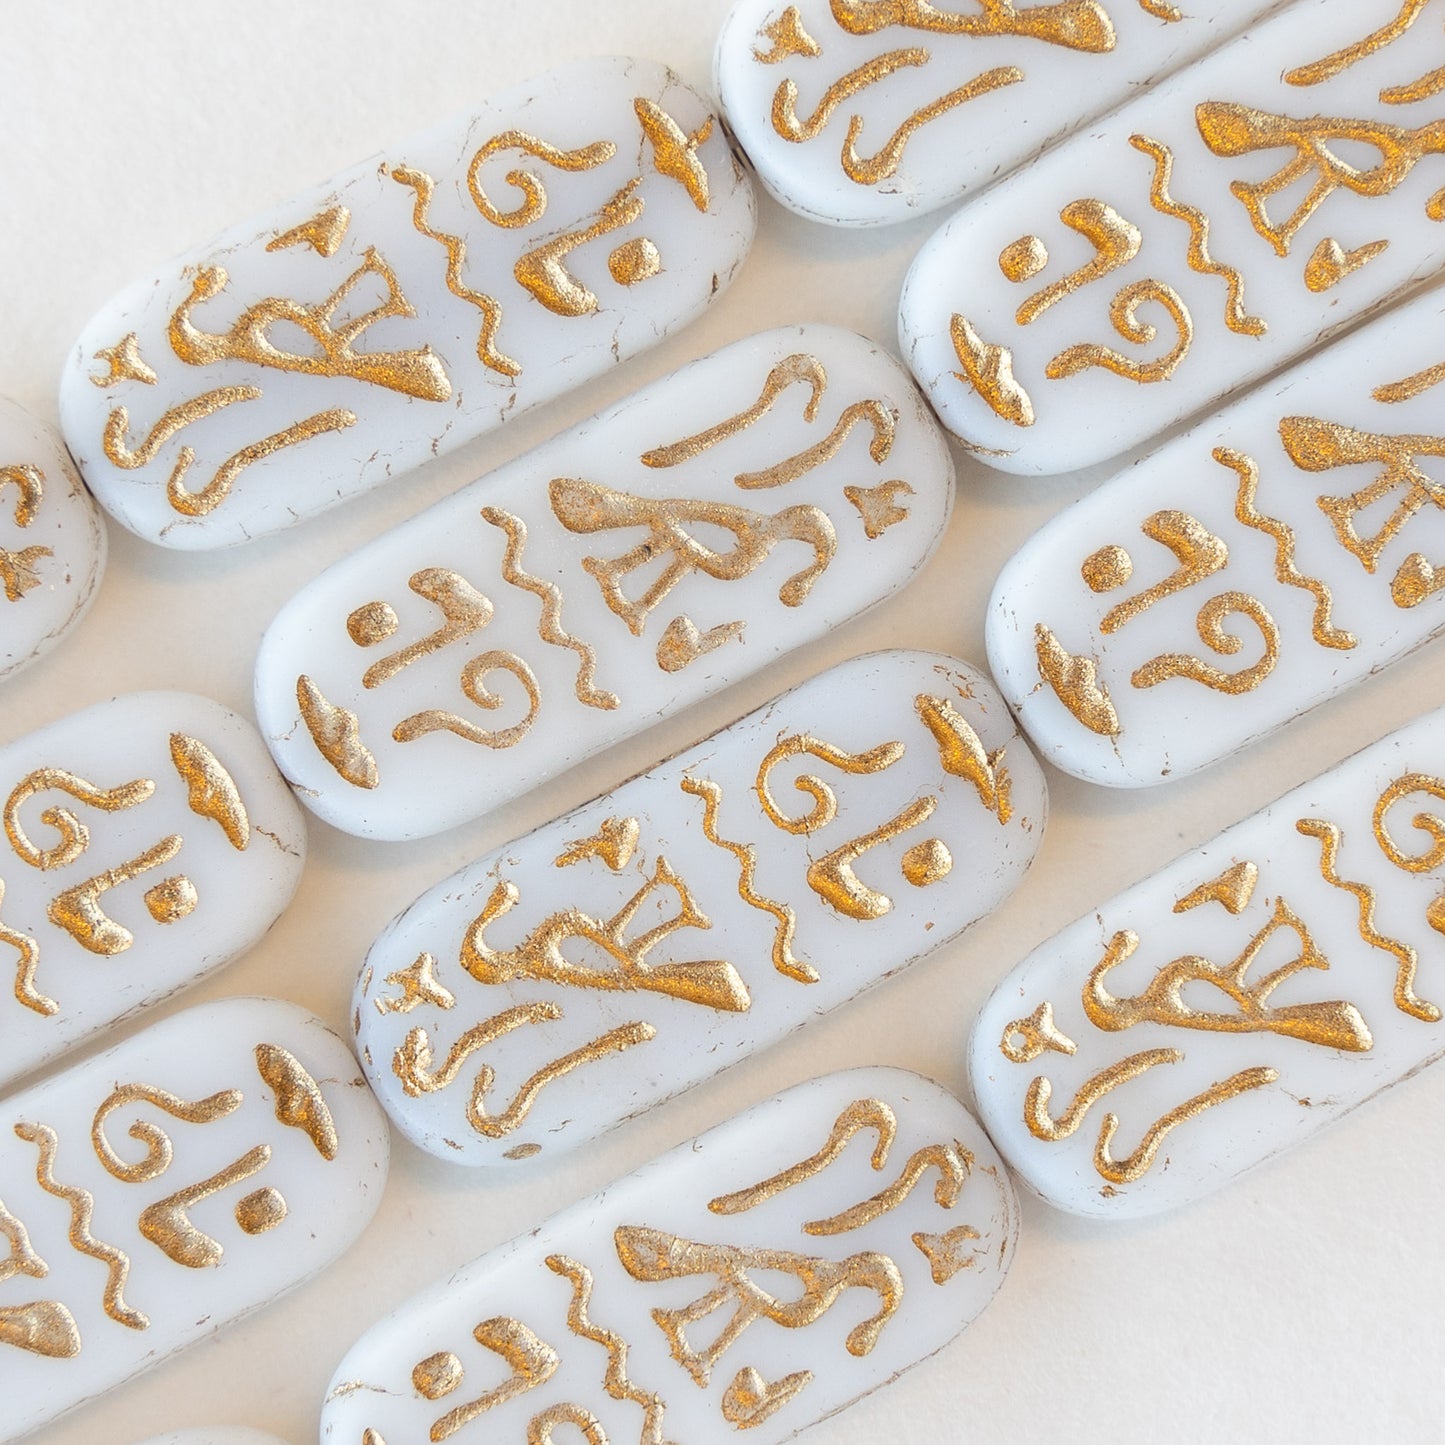 10x25mm Cartouche Beads - White with Gold - 4 Beads